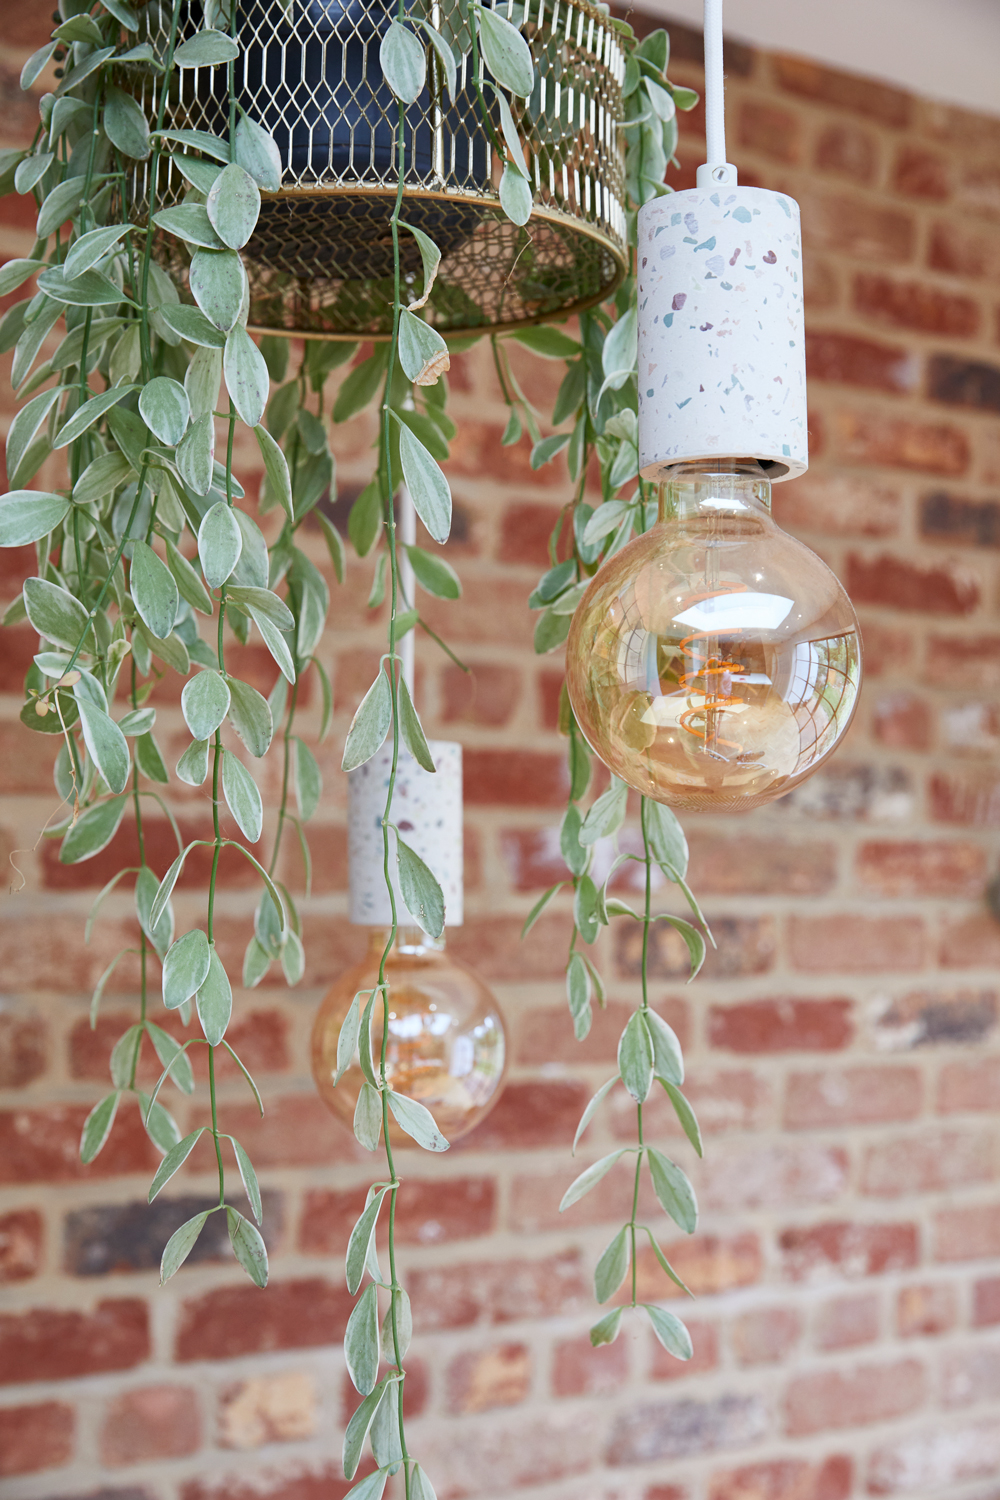 Hanging planter and bulbs with exposed brick backdrop